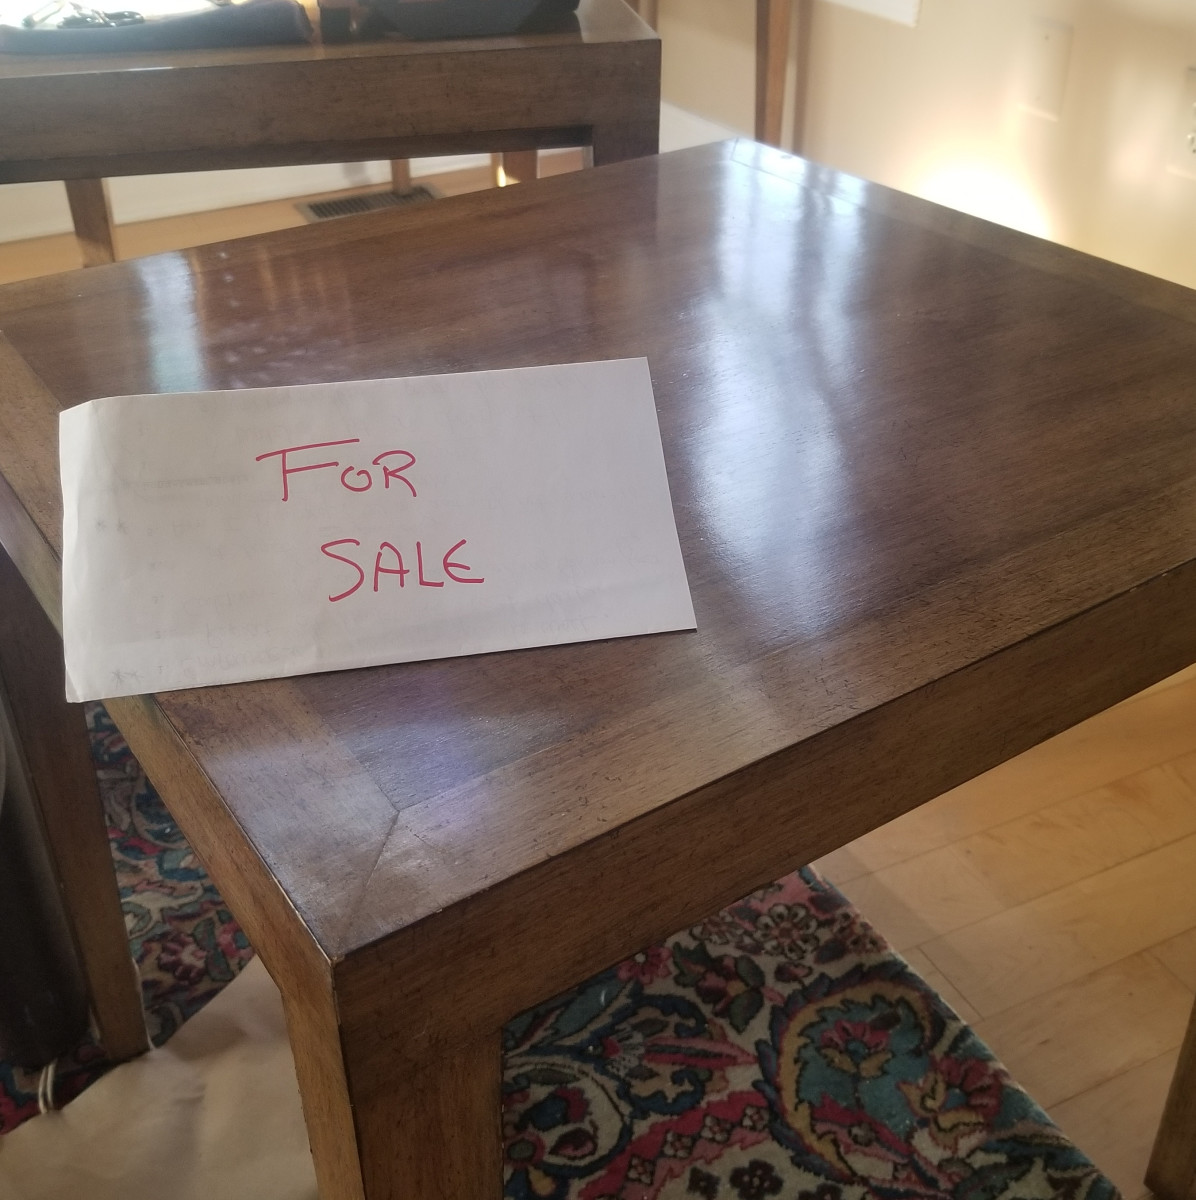 Have something for sale? It may be just what one of your neighbors needs.